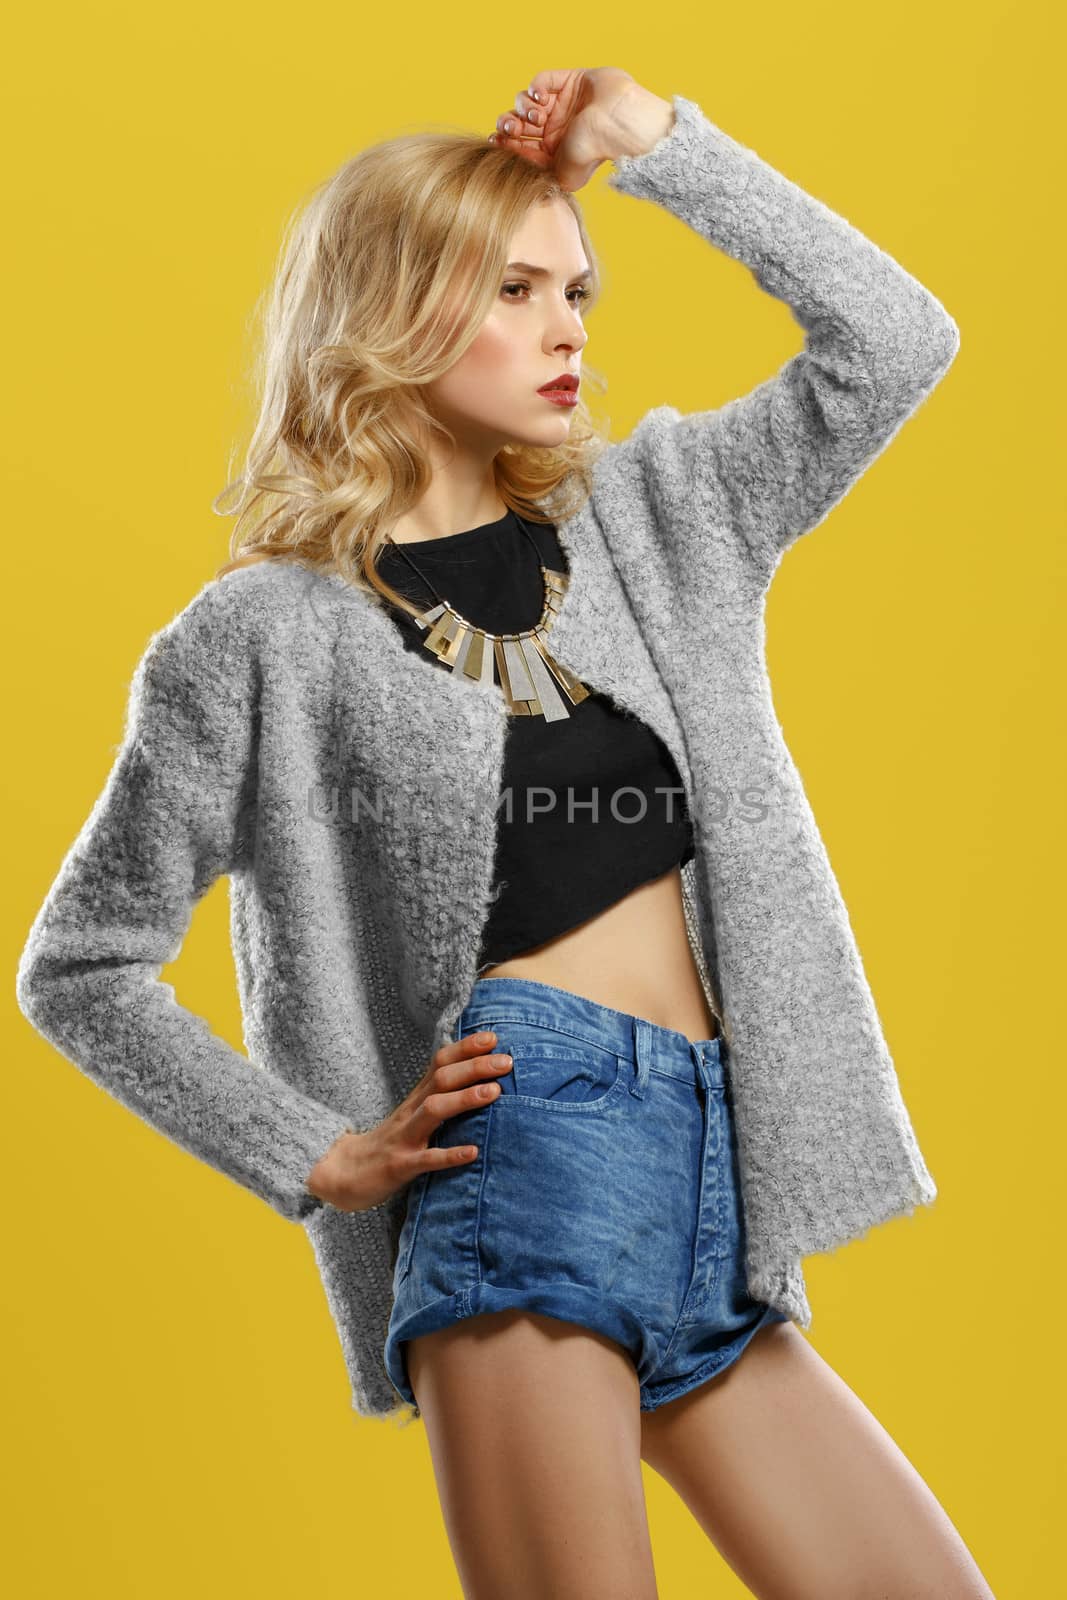 Beautiful blond model in shorts and a t-shirt on a yellow background